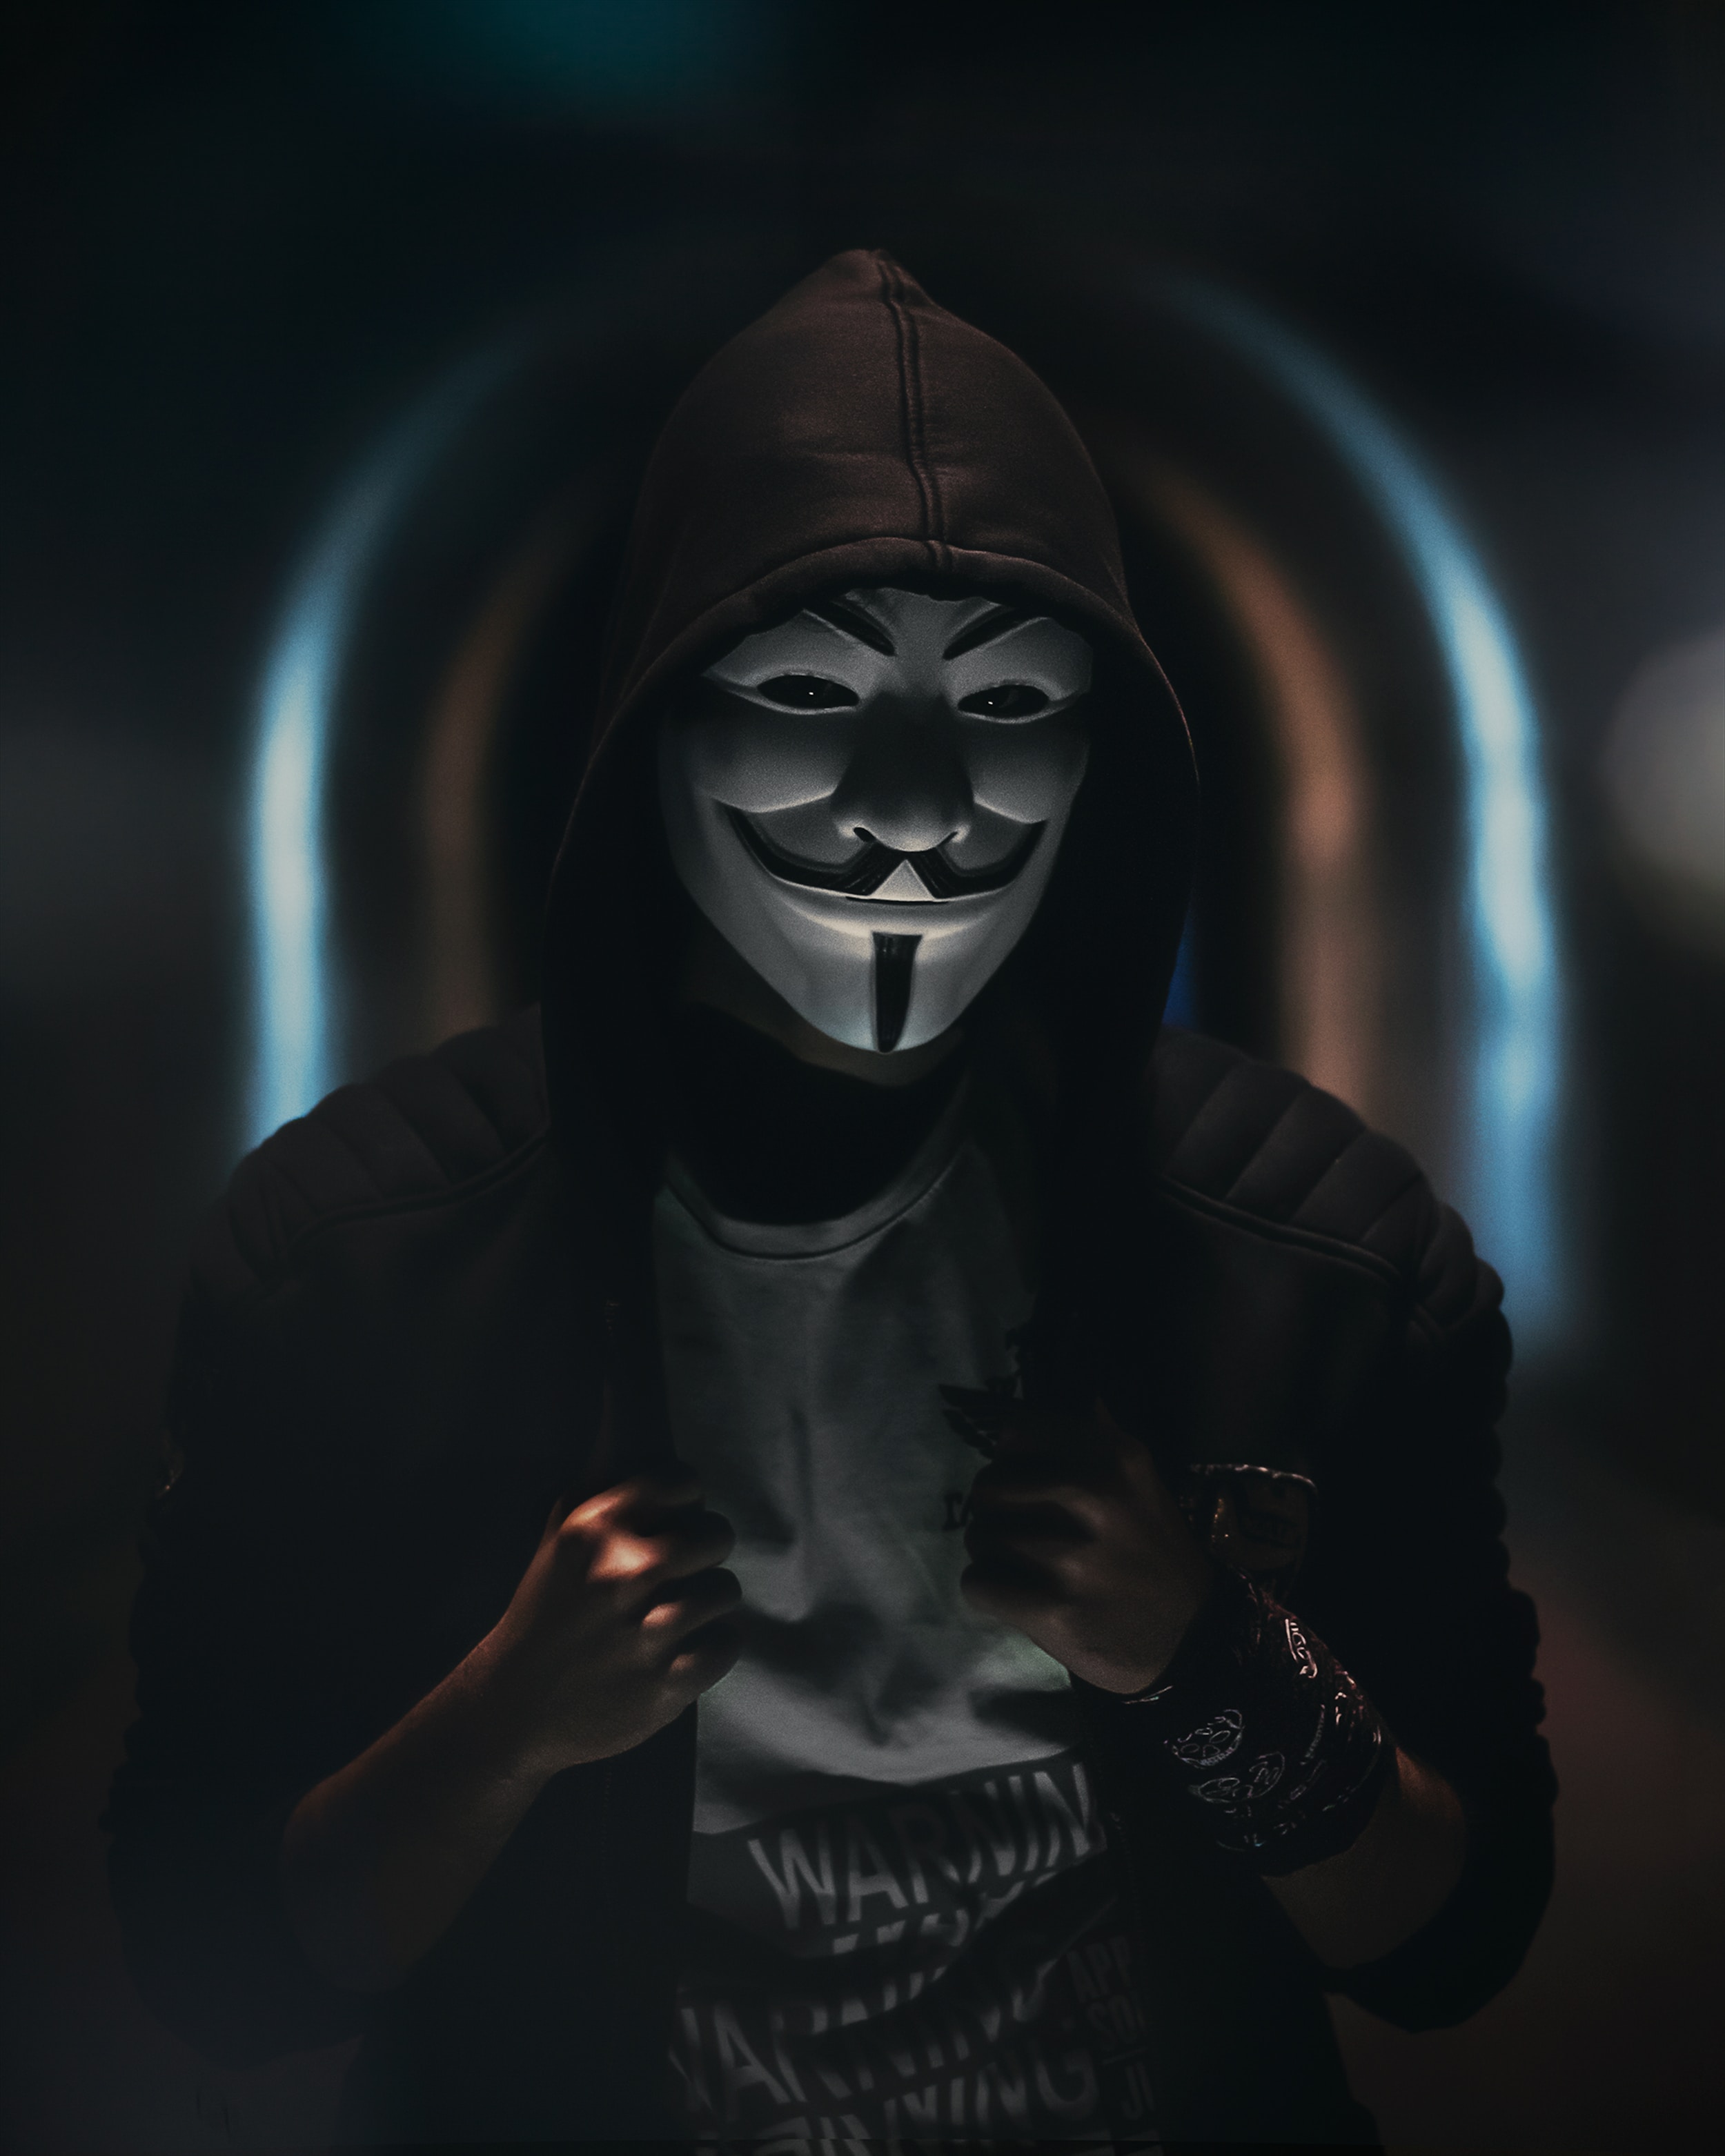 dark, anonymous, miscellanea, miscellaneous, mask, human, person, hood cell phone wallpapers